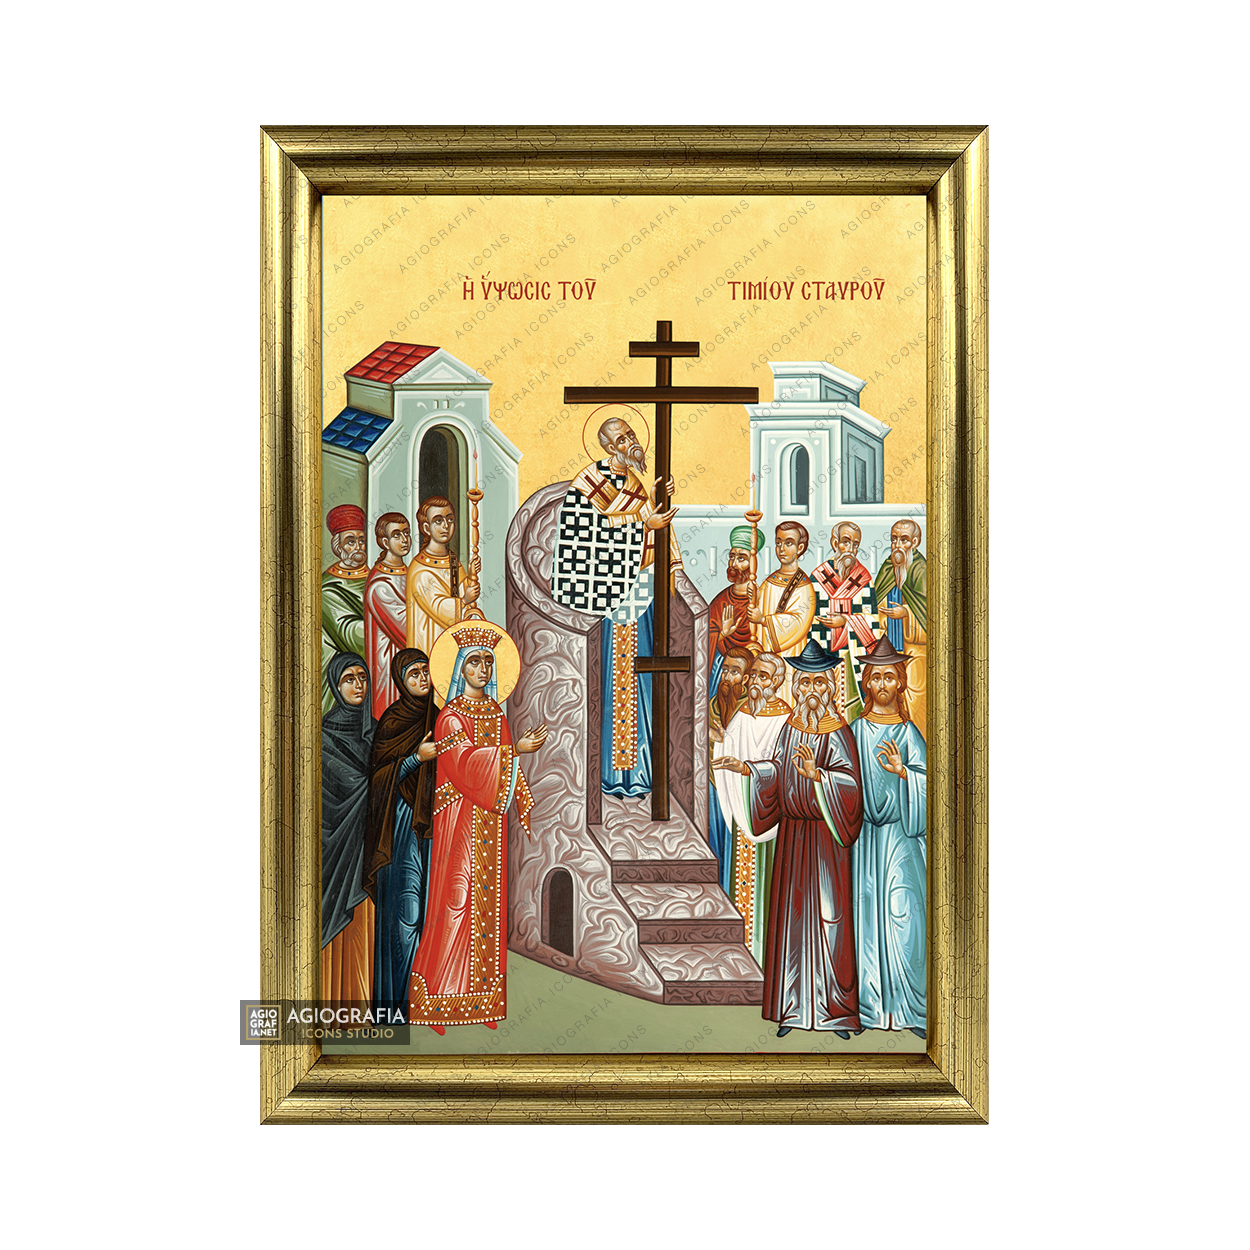 22k Universal Exaltation of the Holy Cross Framed Icon with Gold Leaf